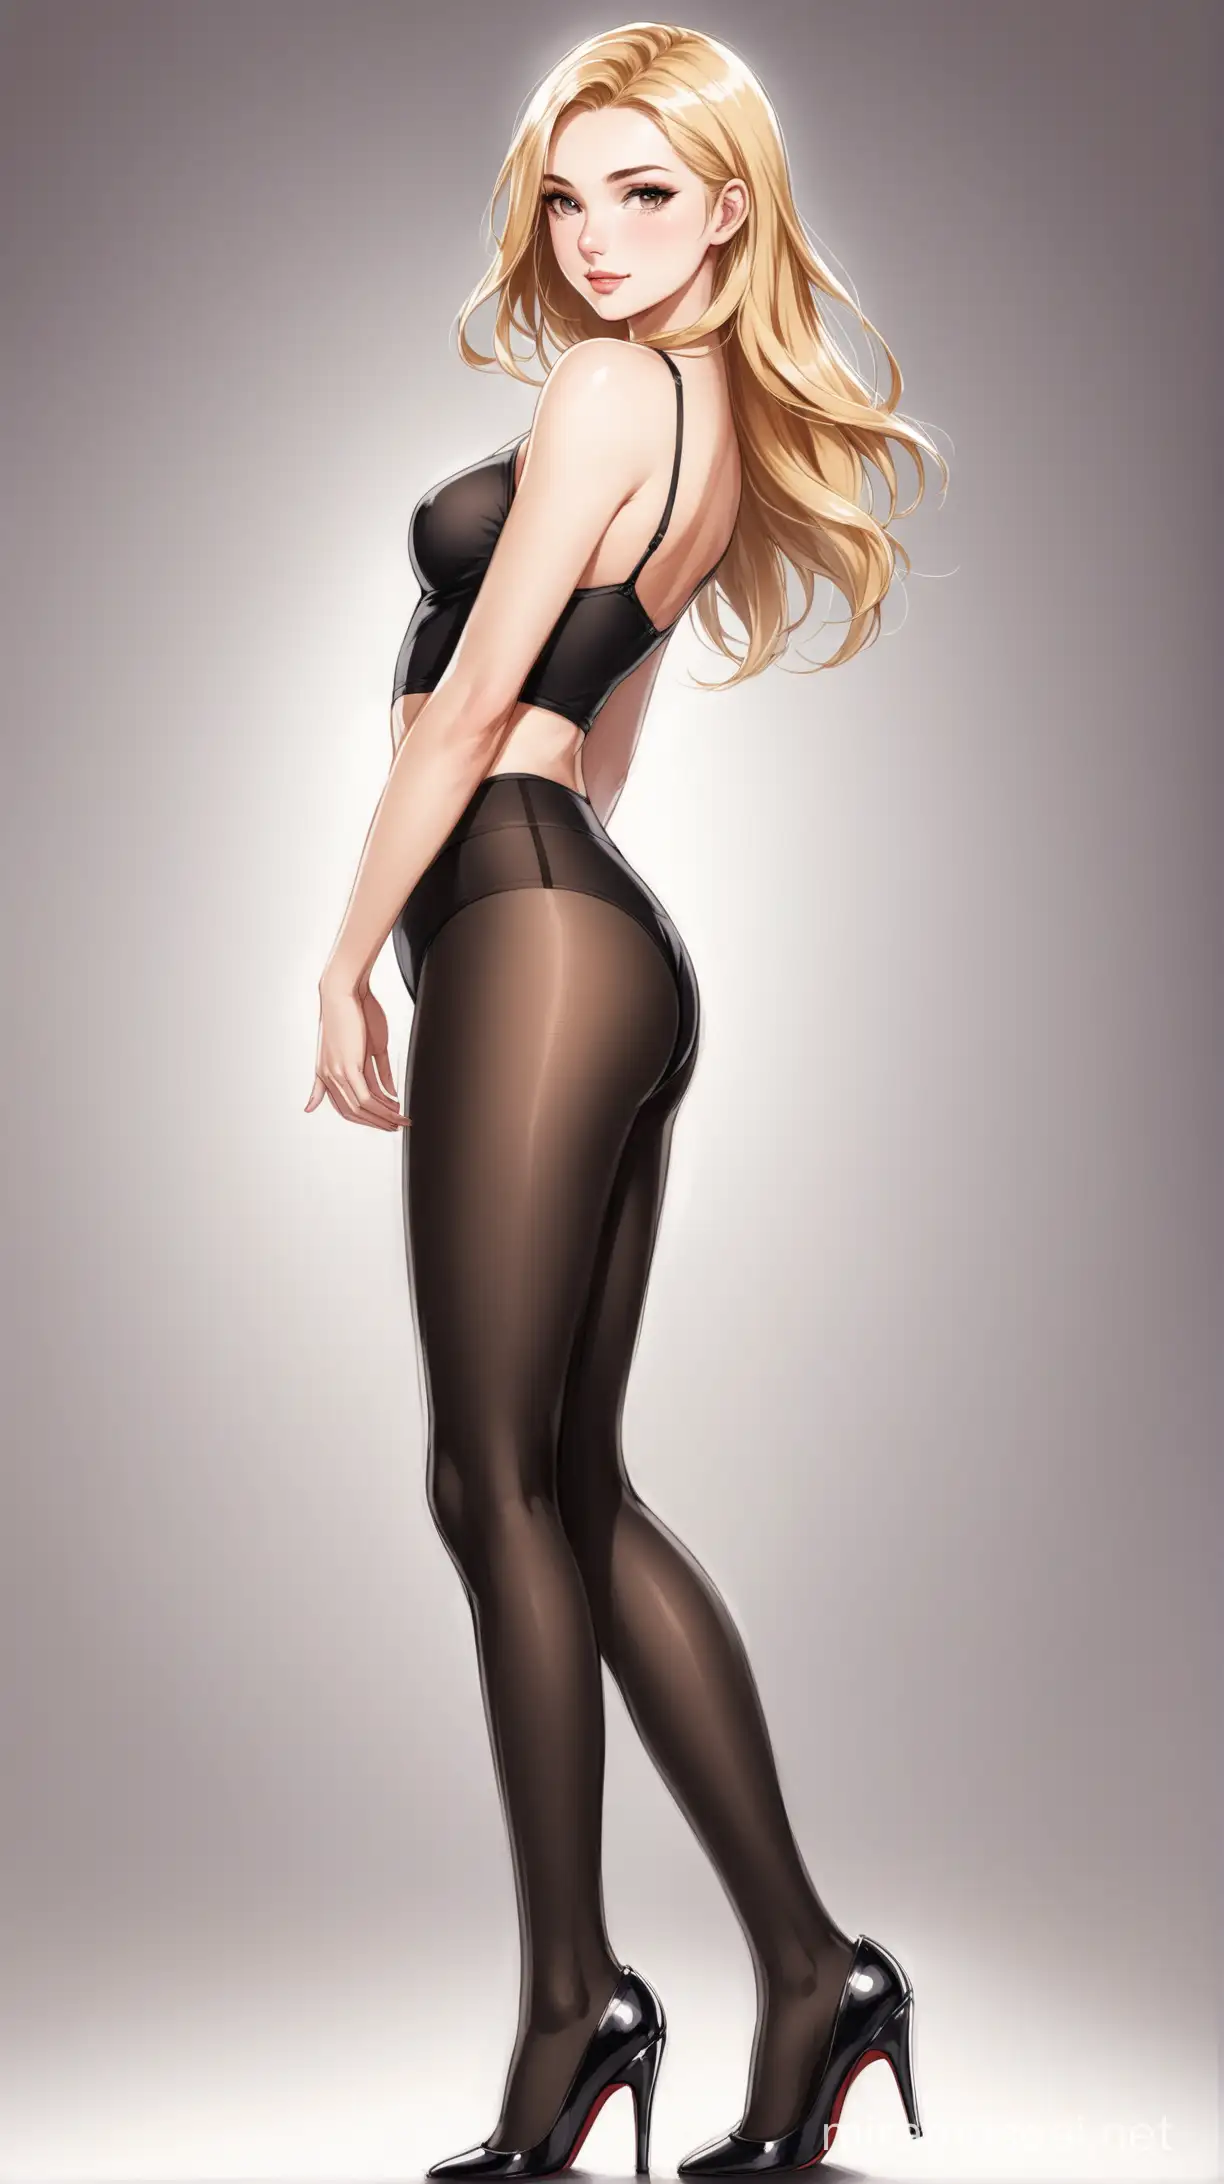 A young white woman with a beautiful face, blonde hair, wearing black tights, mid-length underwear, and high heels.